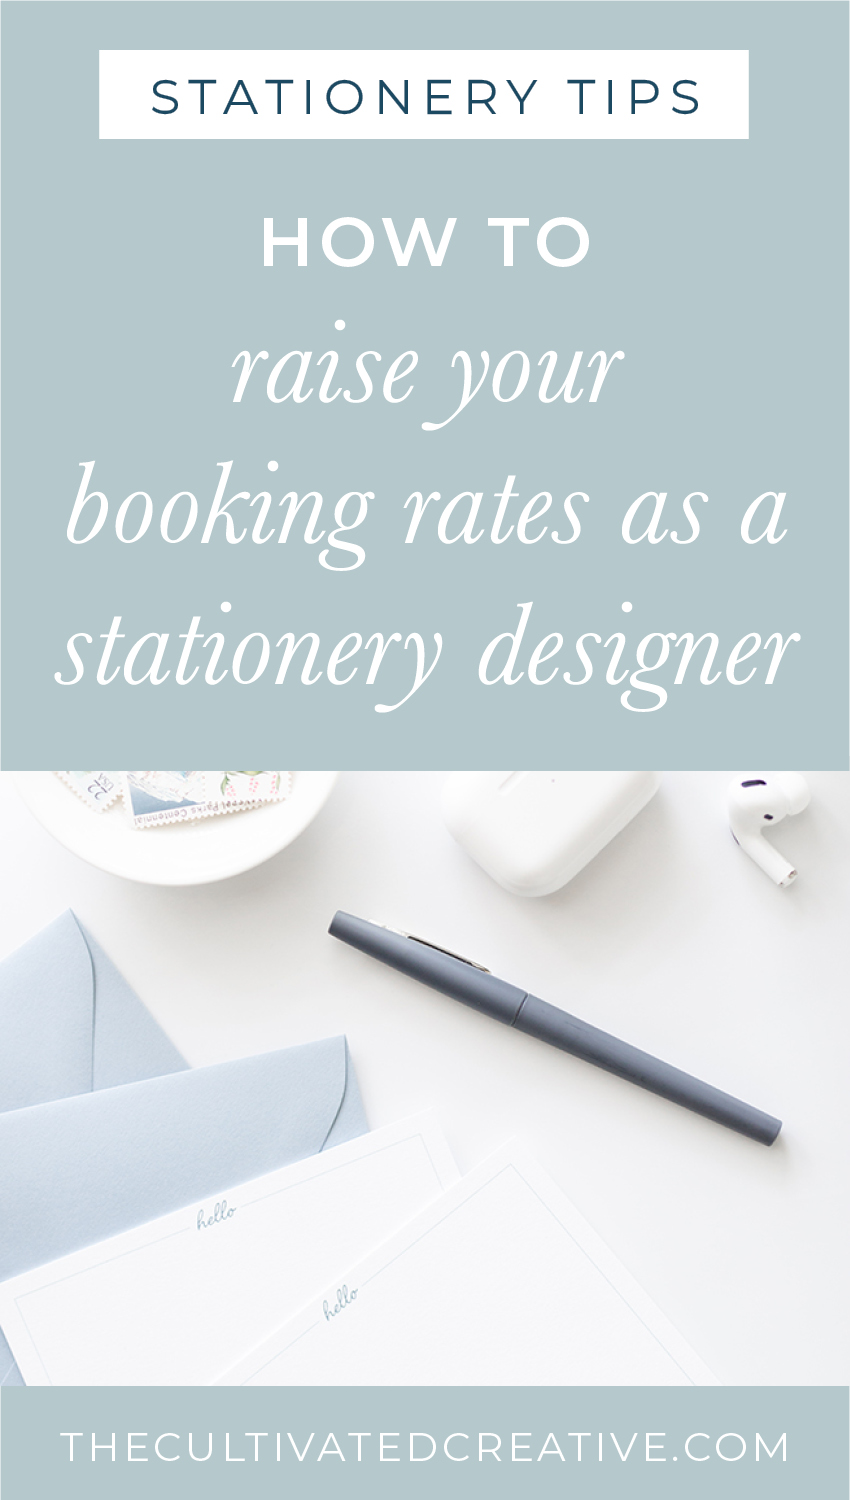 vetting potential clients as a stationer to increase your booking rates